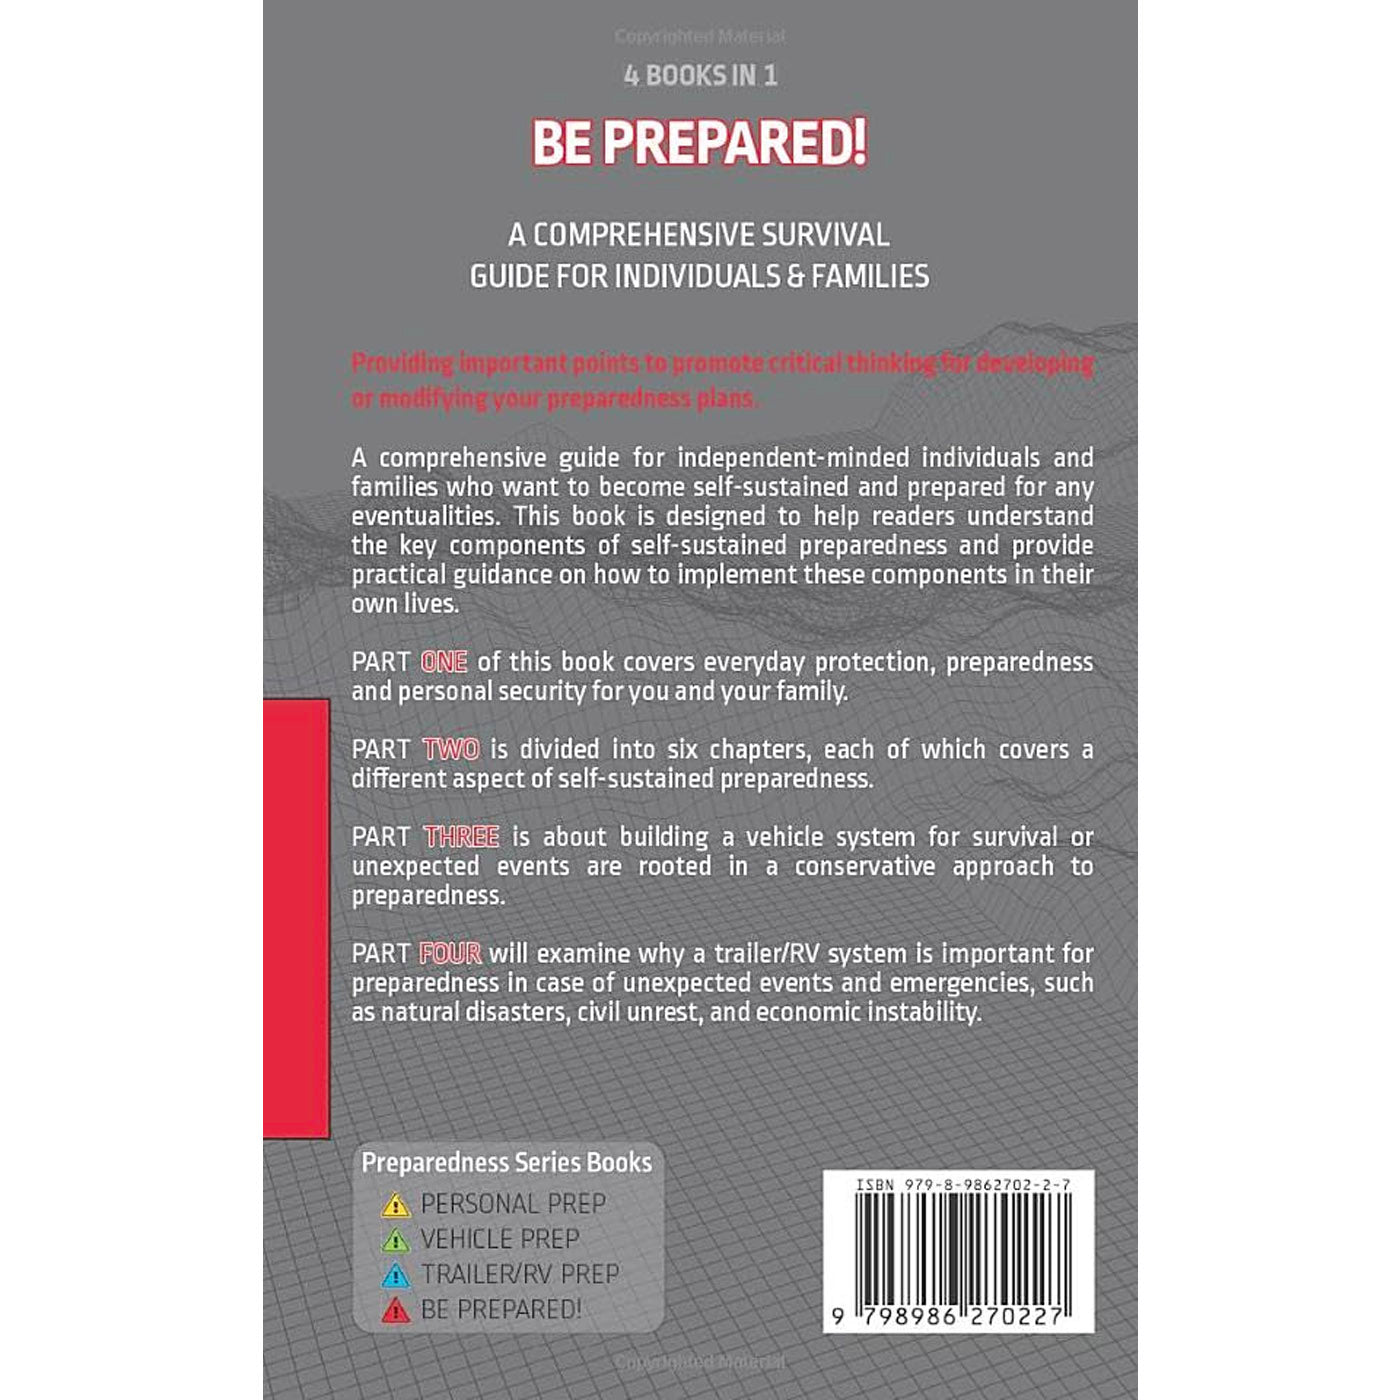 Be Prepared!: A Comprehensive Survival Guide for Individuals & Families